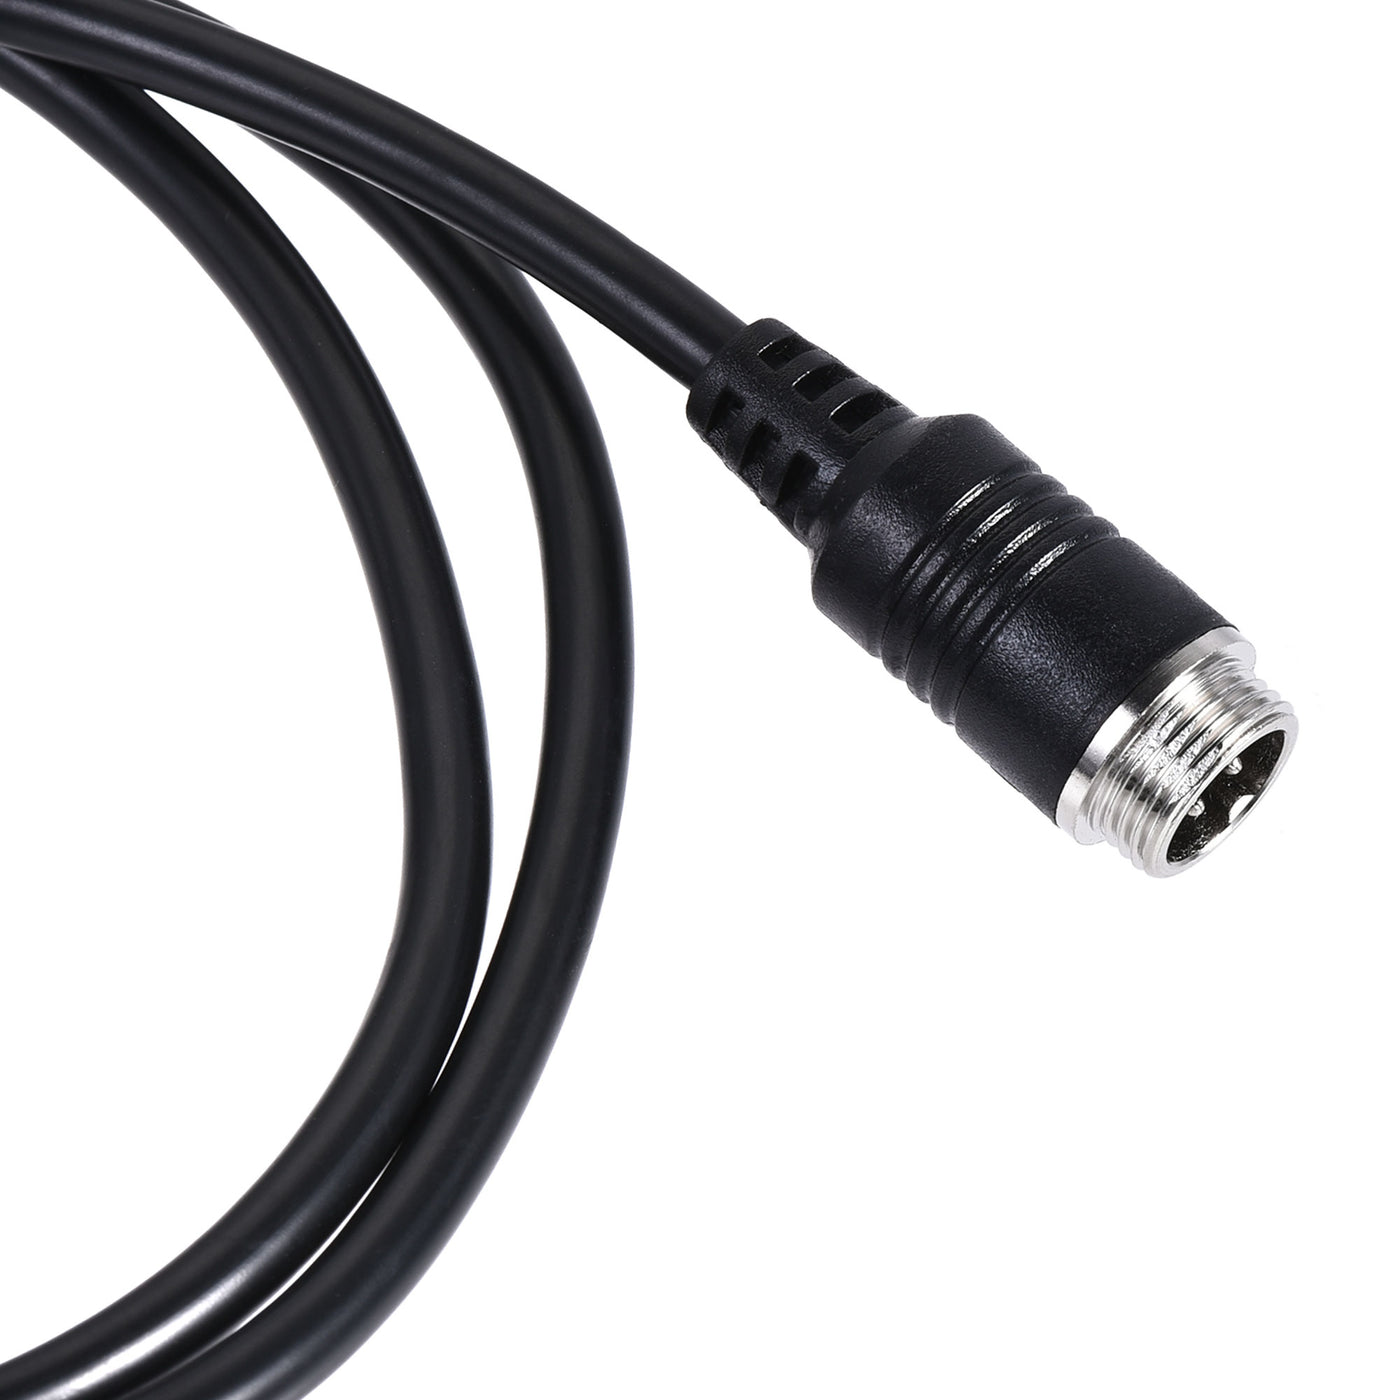 Uxcell Uxcell Video Aviation Cable 4-Pin 22.97FT 7M Male to Female Shielded Extension Cable